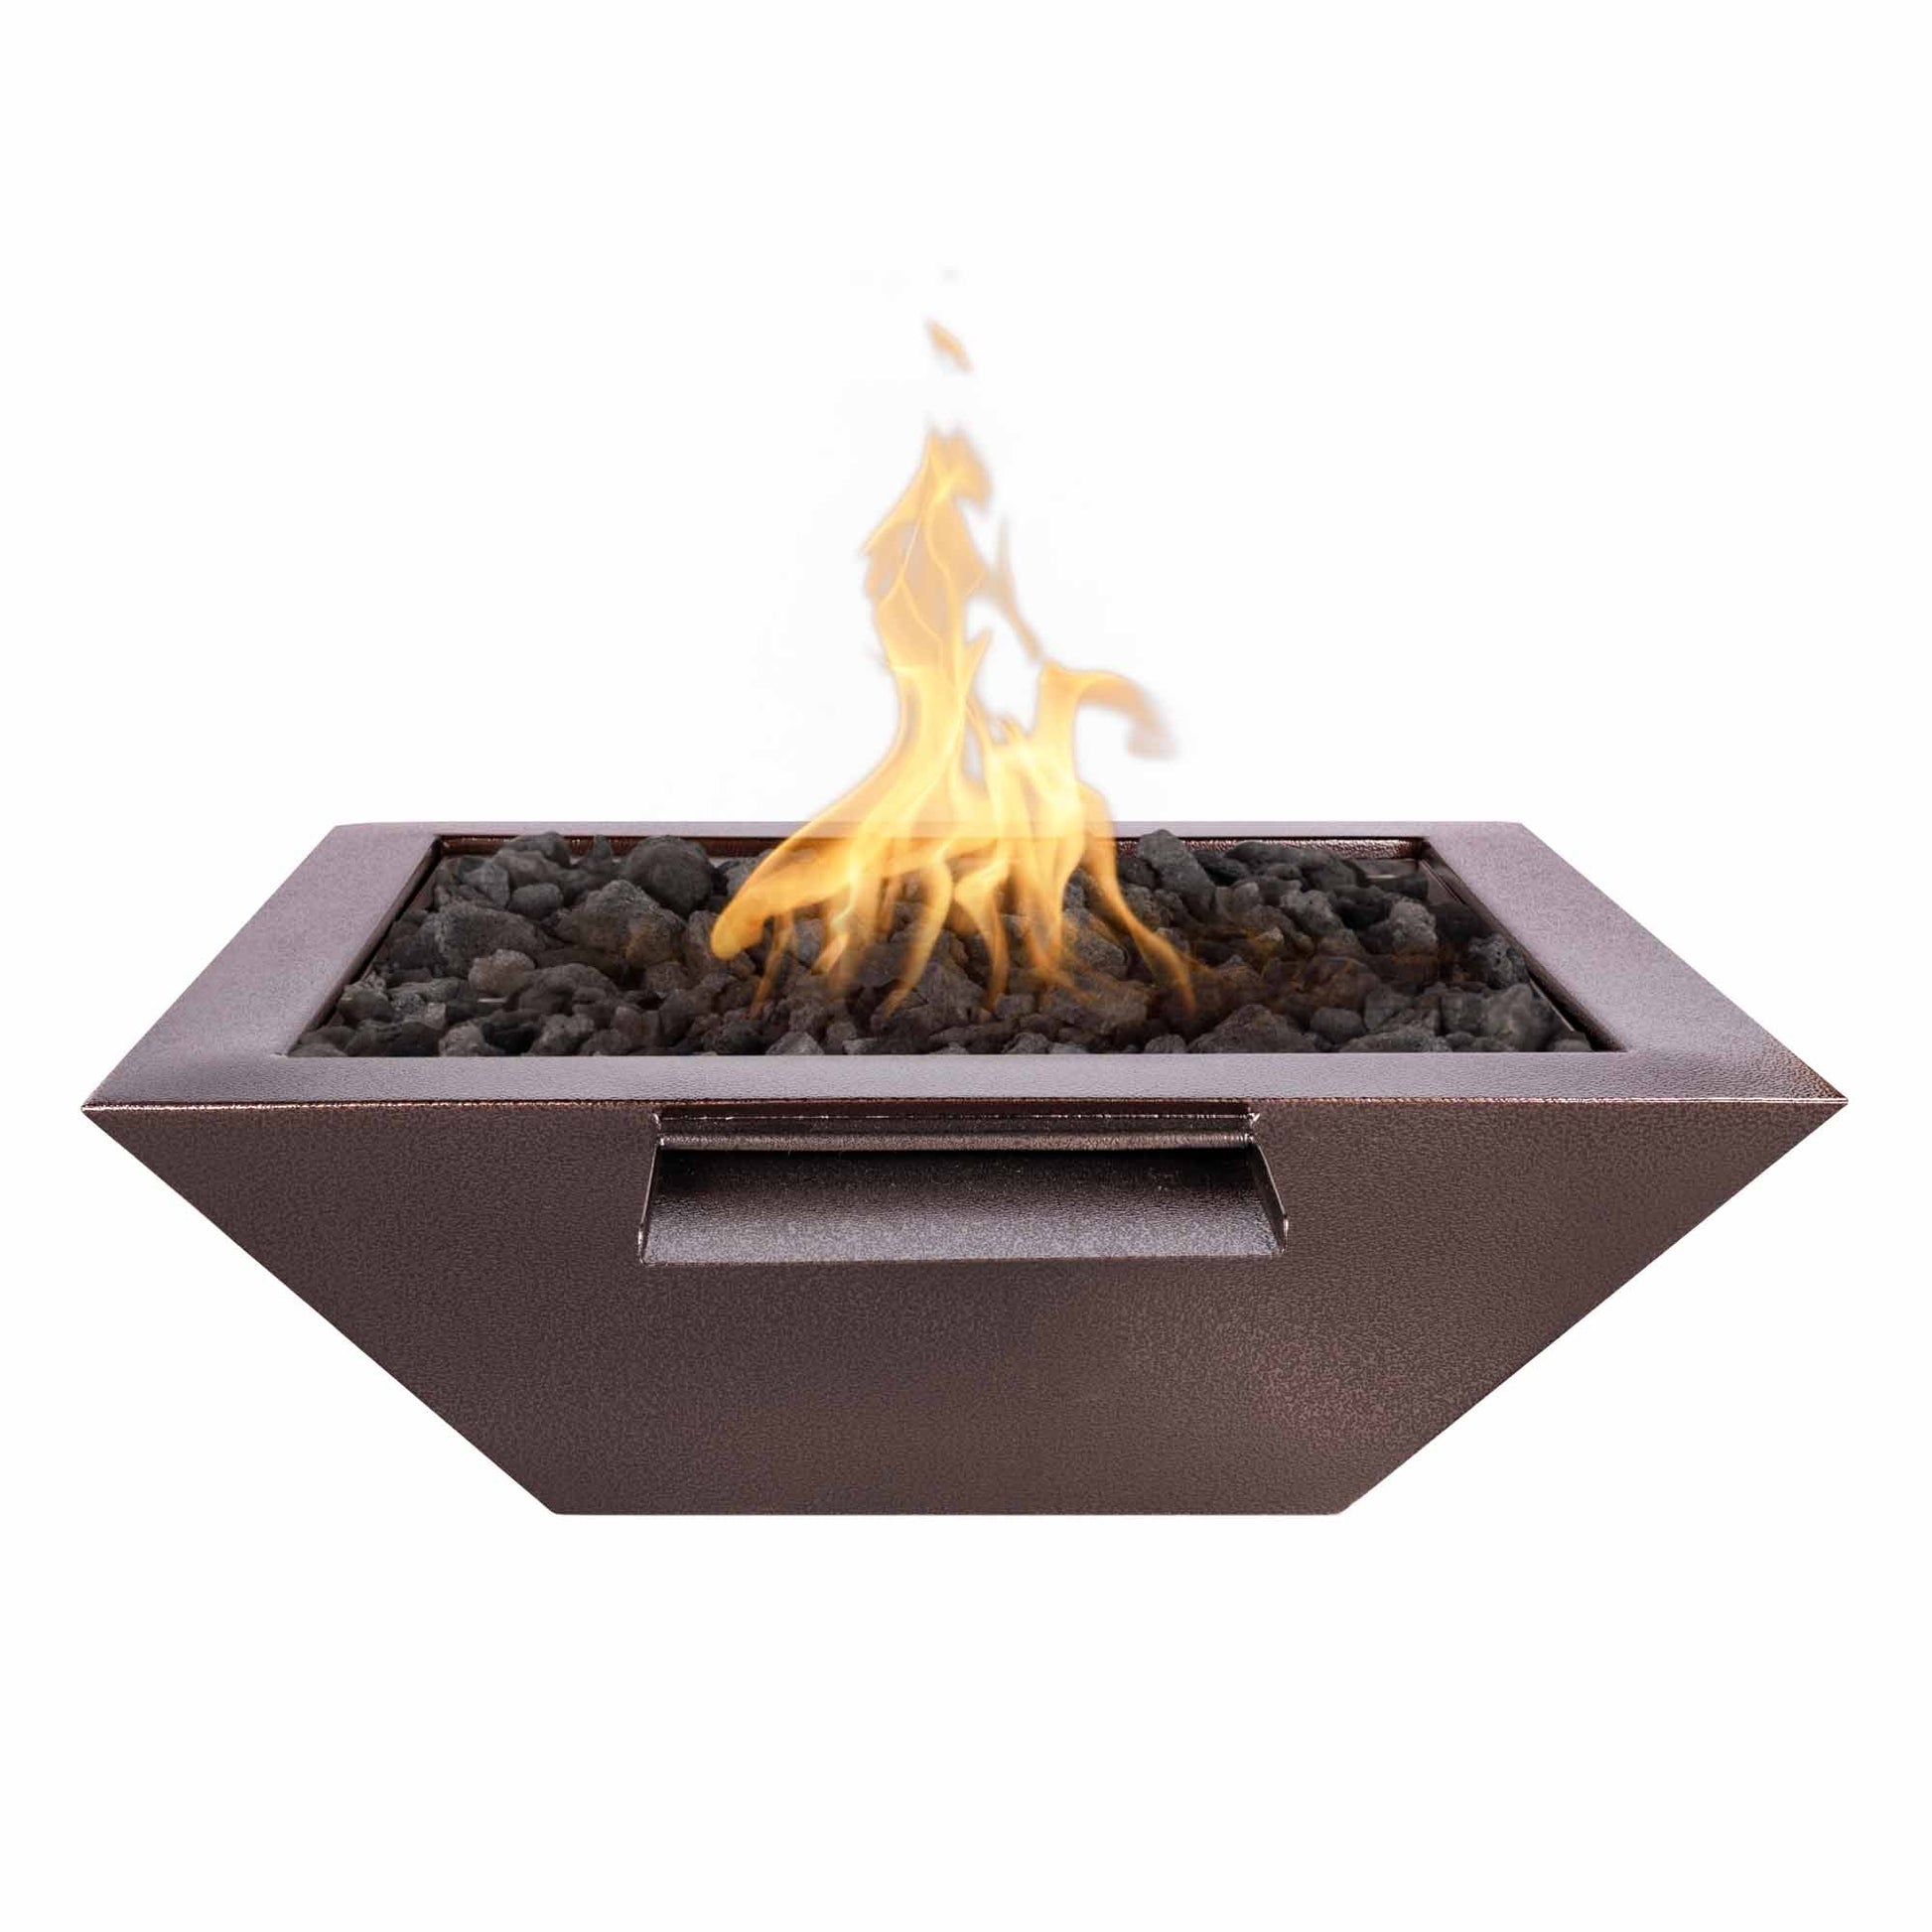 The Outdoor Plus Square Maya 24" Gray Powder Coated Metal Liquid Propane Fire & Water Bowl with Match Lit with Flame Sense Ignition